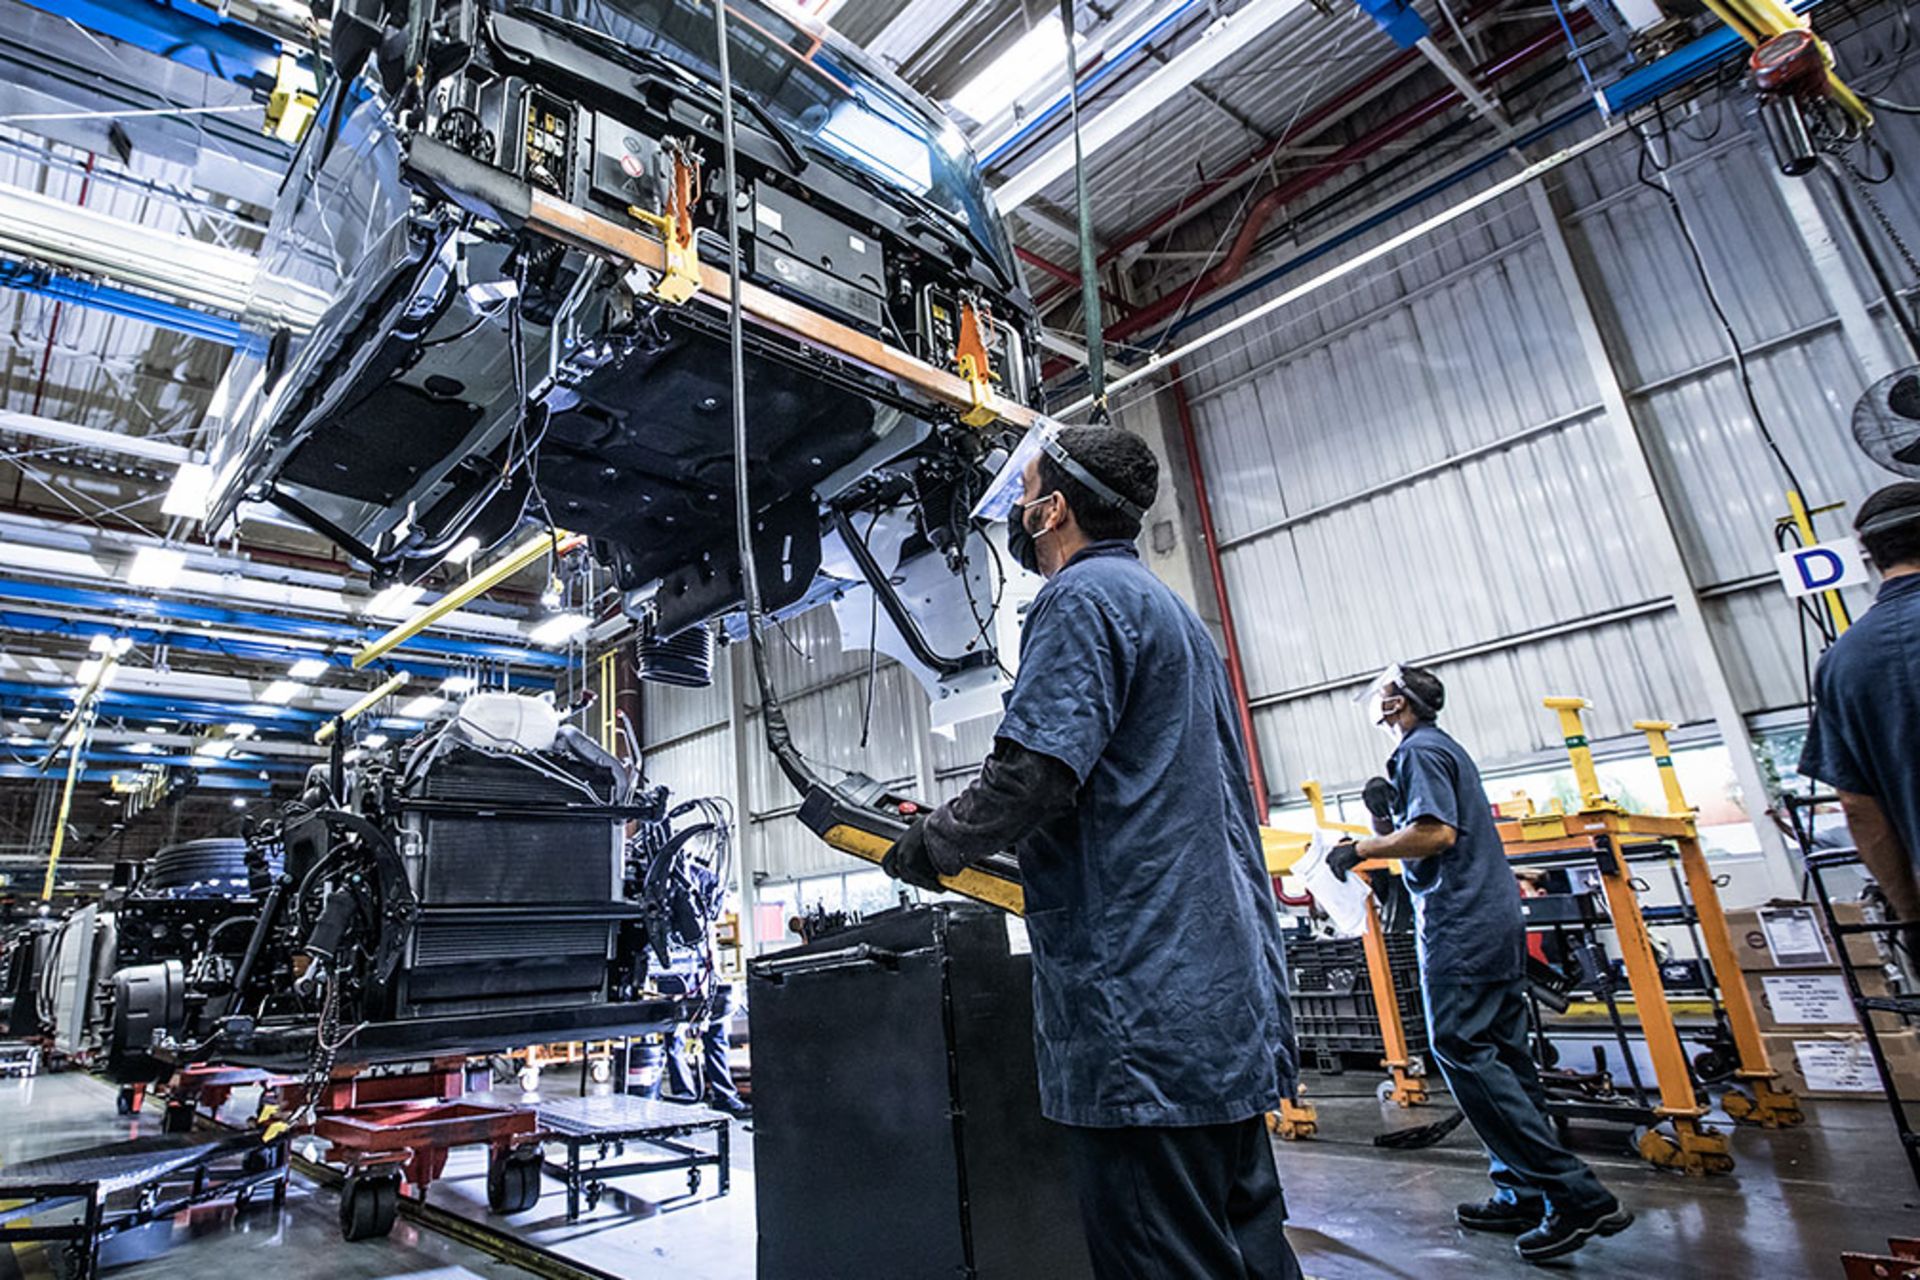 The TRATON brand Volkswagen Caminhões e Ônibus (VWCO) is building the Meteor truck series in a completely new digital manufacturing facility at the plant in Resende, Brazil. 